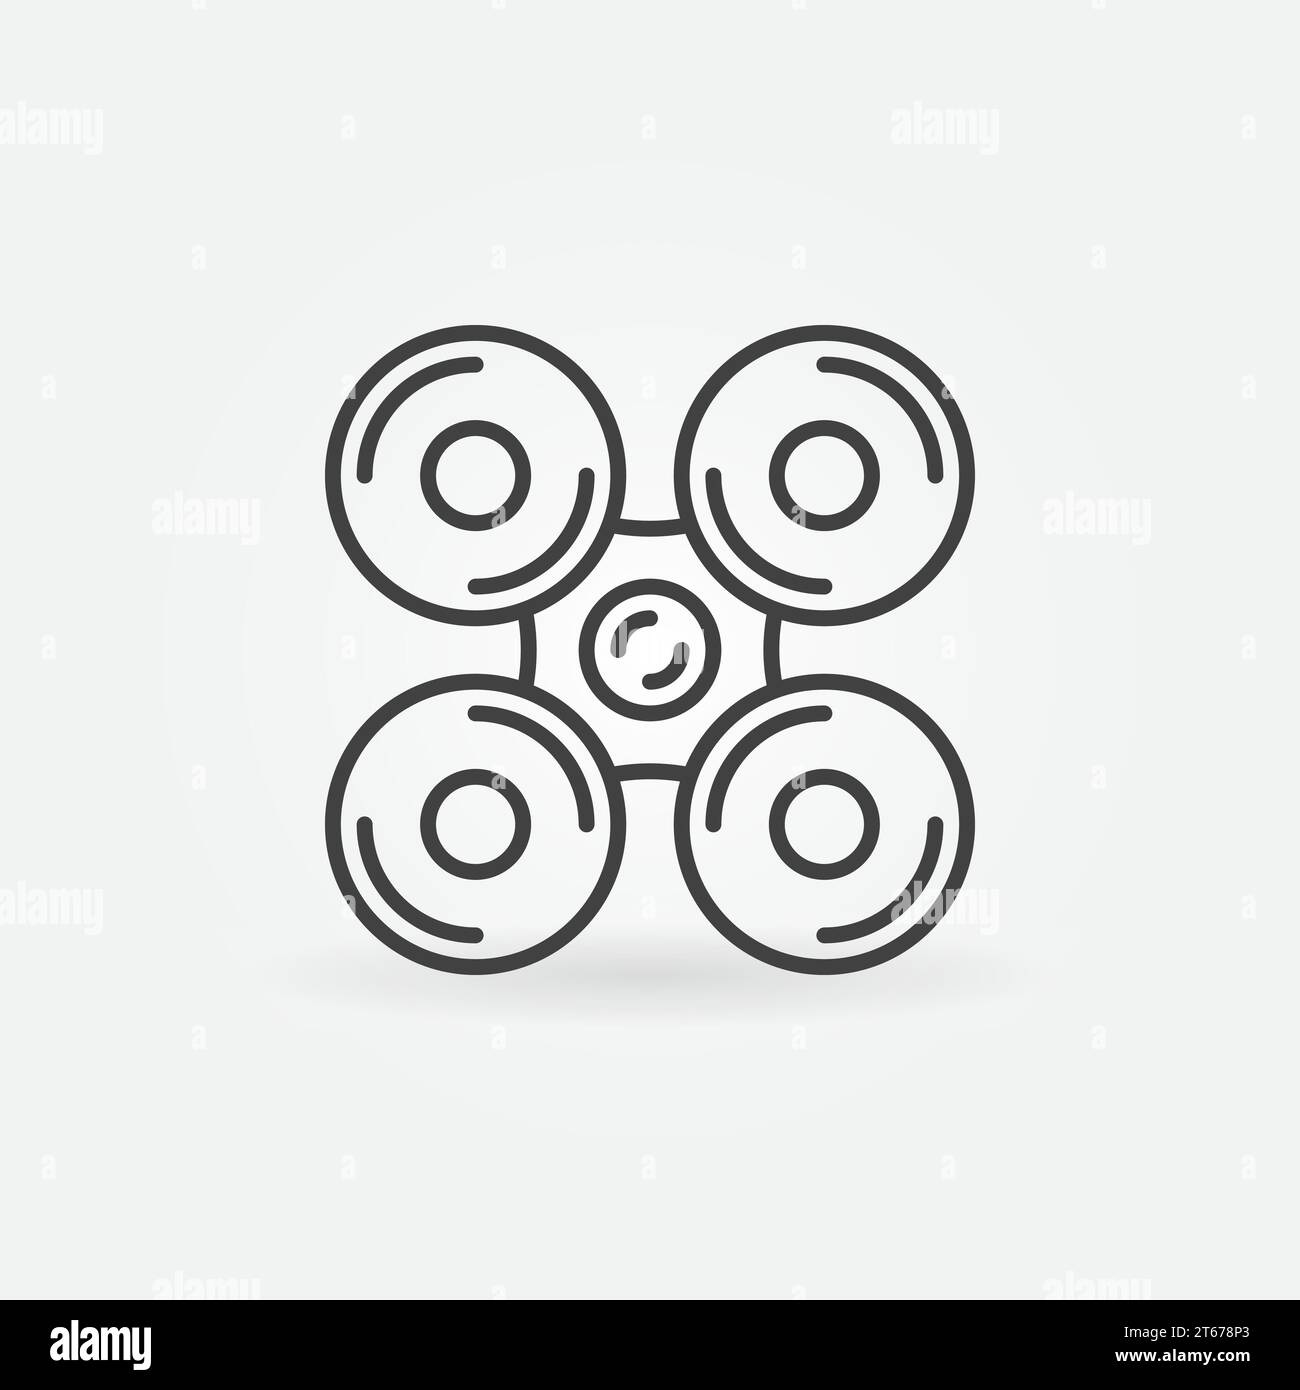 Quadrocopter linear icon - vector drone concept symbol or logo element in thin line style Stock Vector